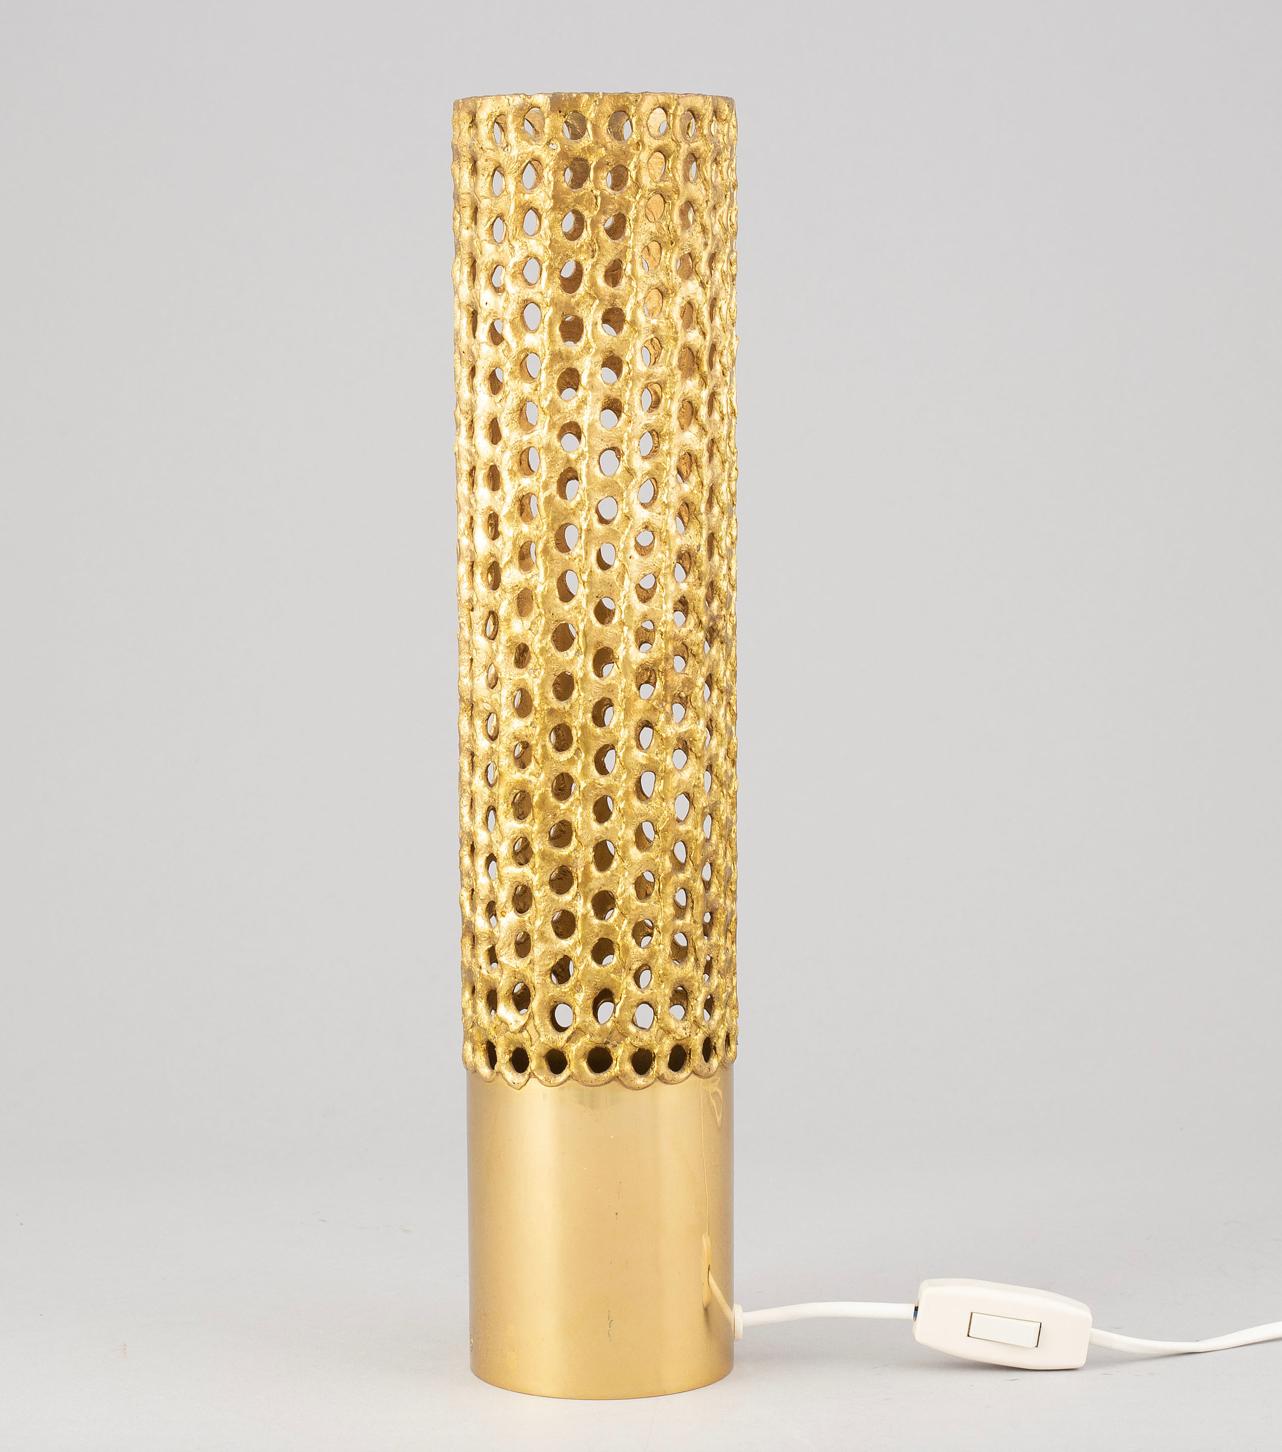 Pierre Forsell
(Sweden, 1925-2004)
A brass table lamp by Pierre Forsell, second half of the 20th century. Produced by Skultuna, Sweden. Marked by manufacturer.
Measures: Height 15.75